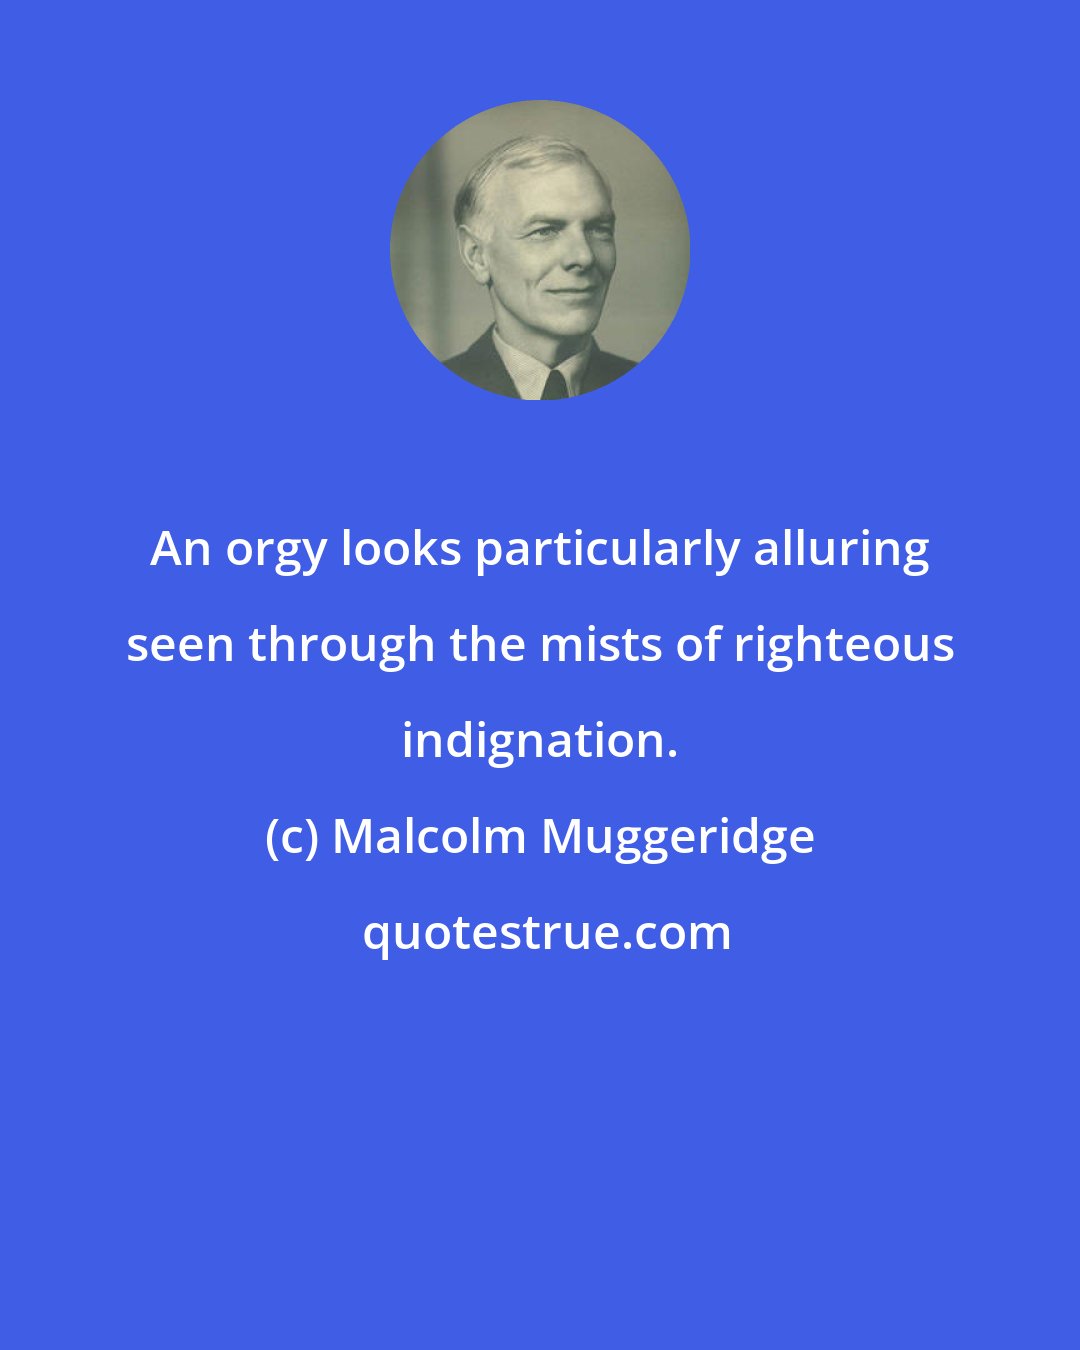 Malcolm Muggeridge: An orgy looks particularly alluring seen through the mists of righteous indignation.